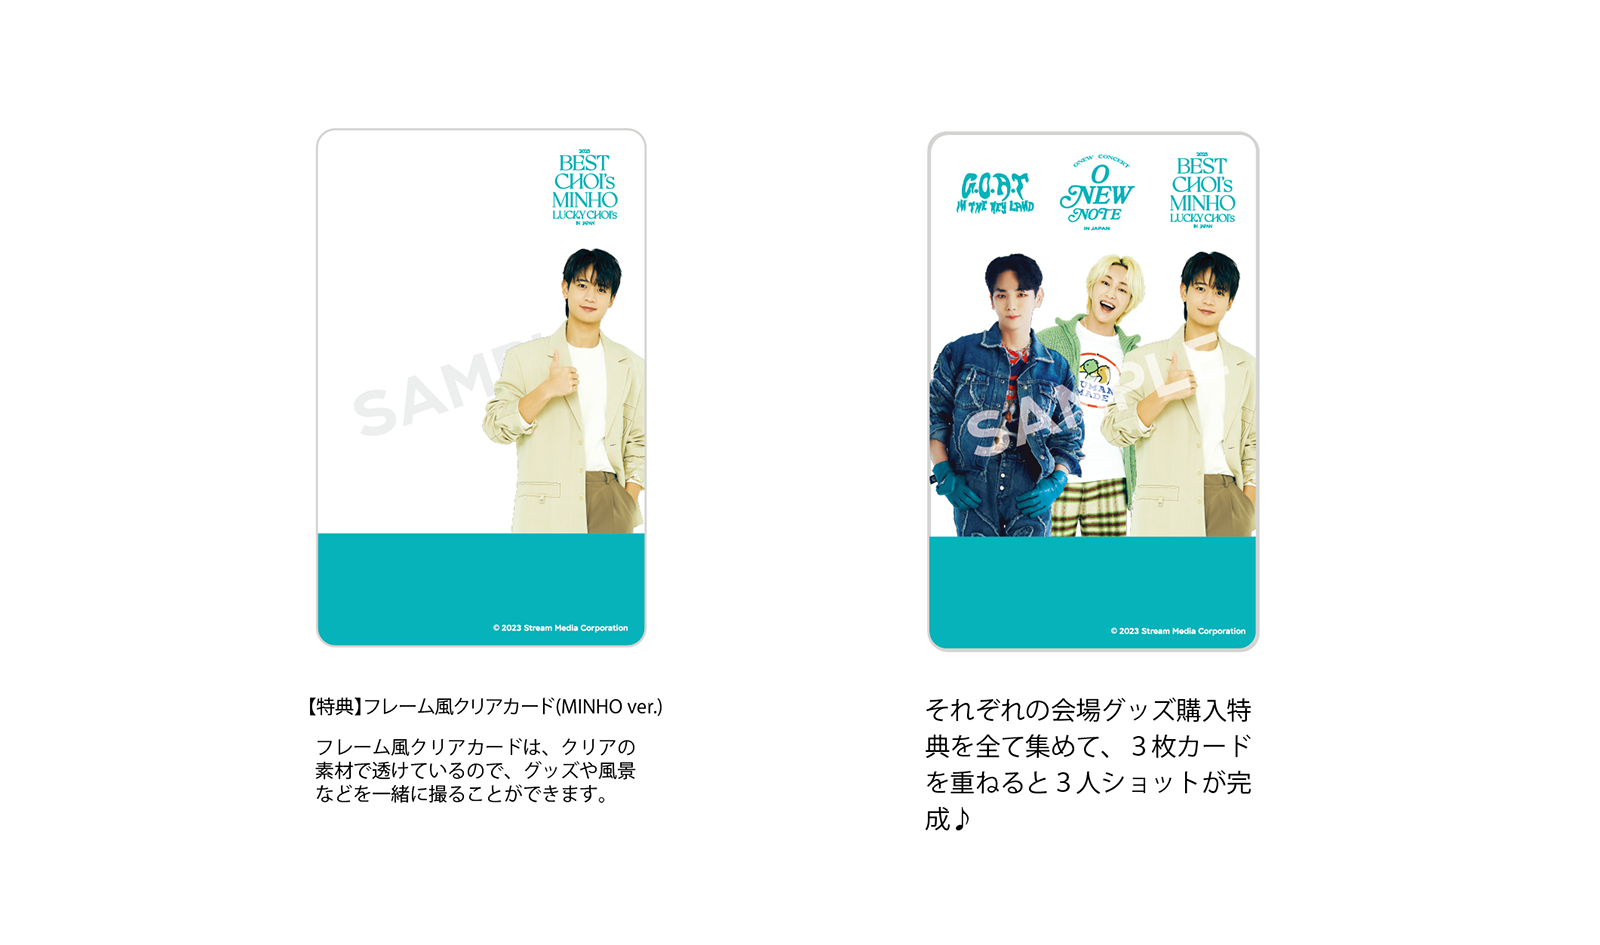 2023 BEST CHOI's MINHO - LUCKY CHOI's in JAPAN」のグッズ販売が決定 